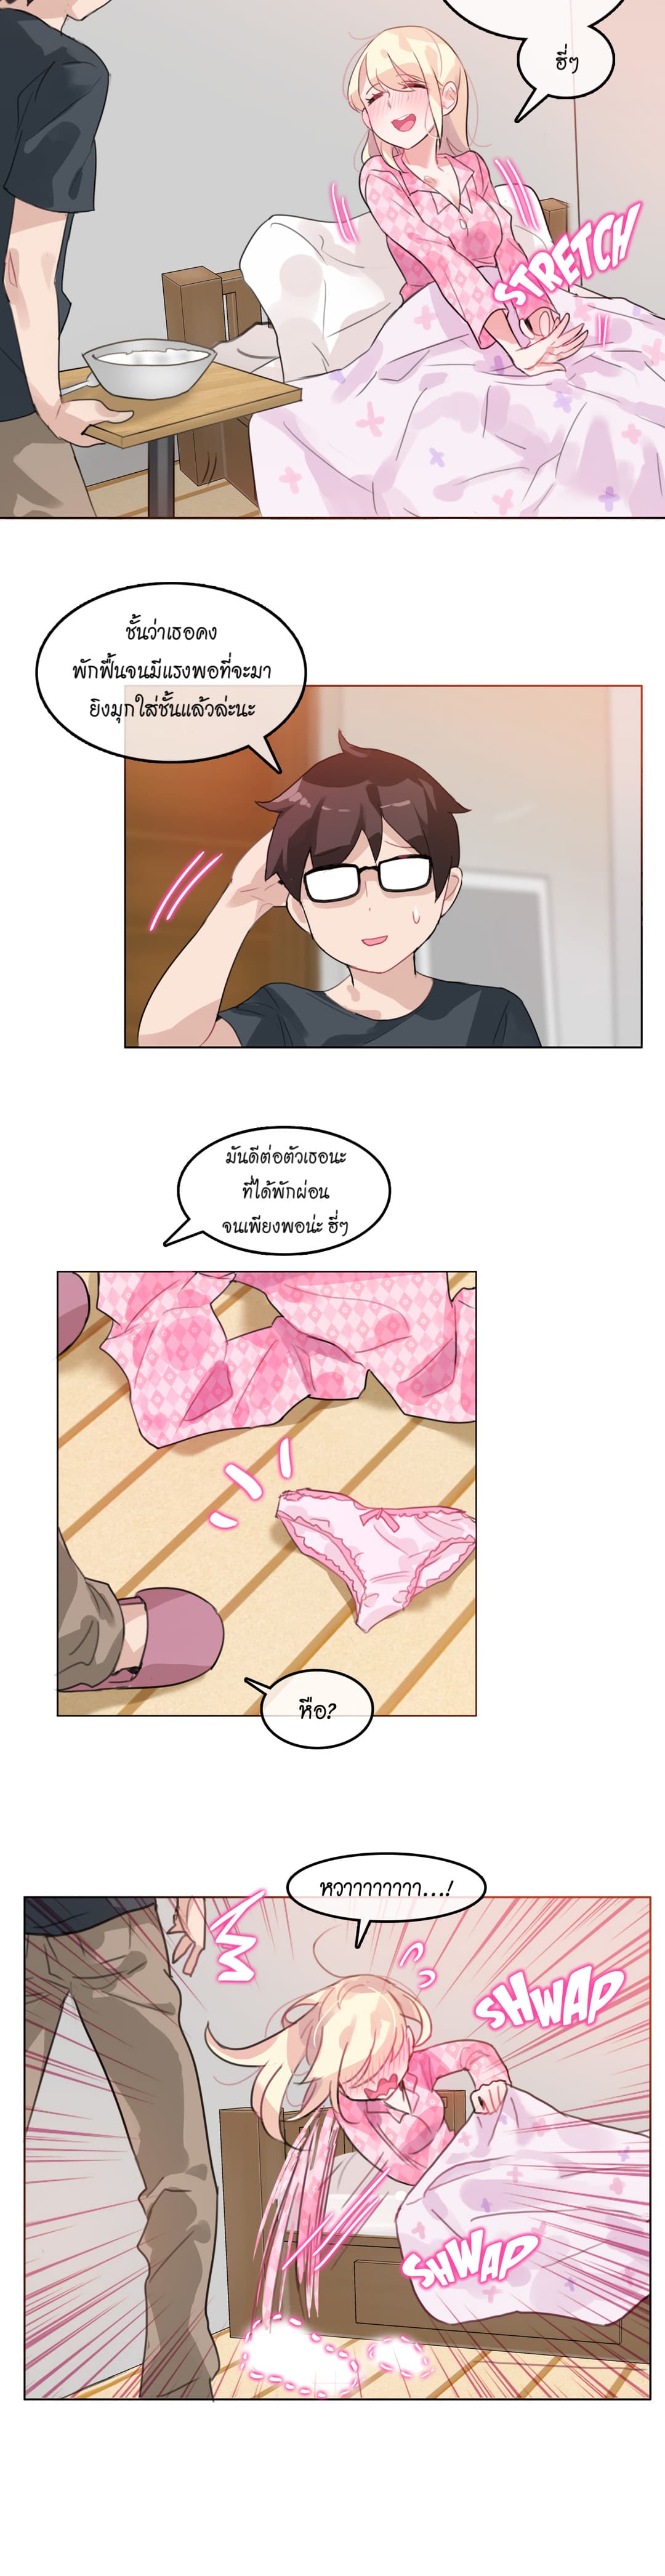 A Pervert’s Daily Life 15 (12)